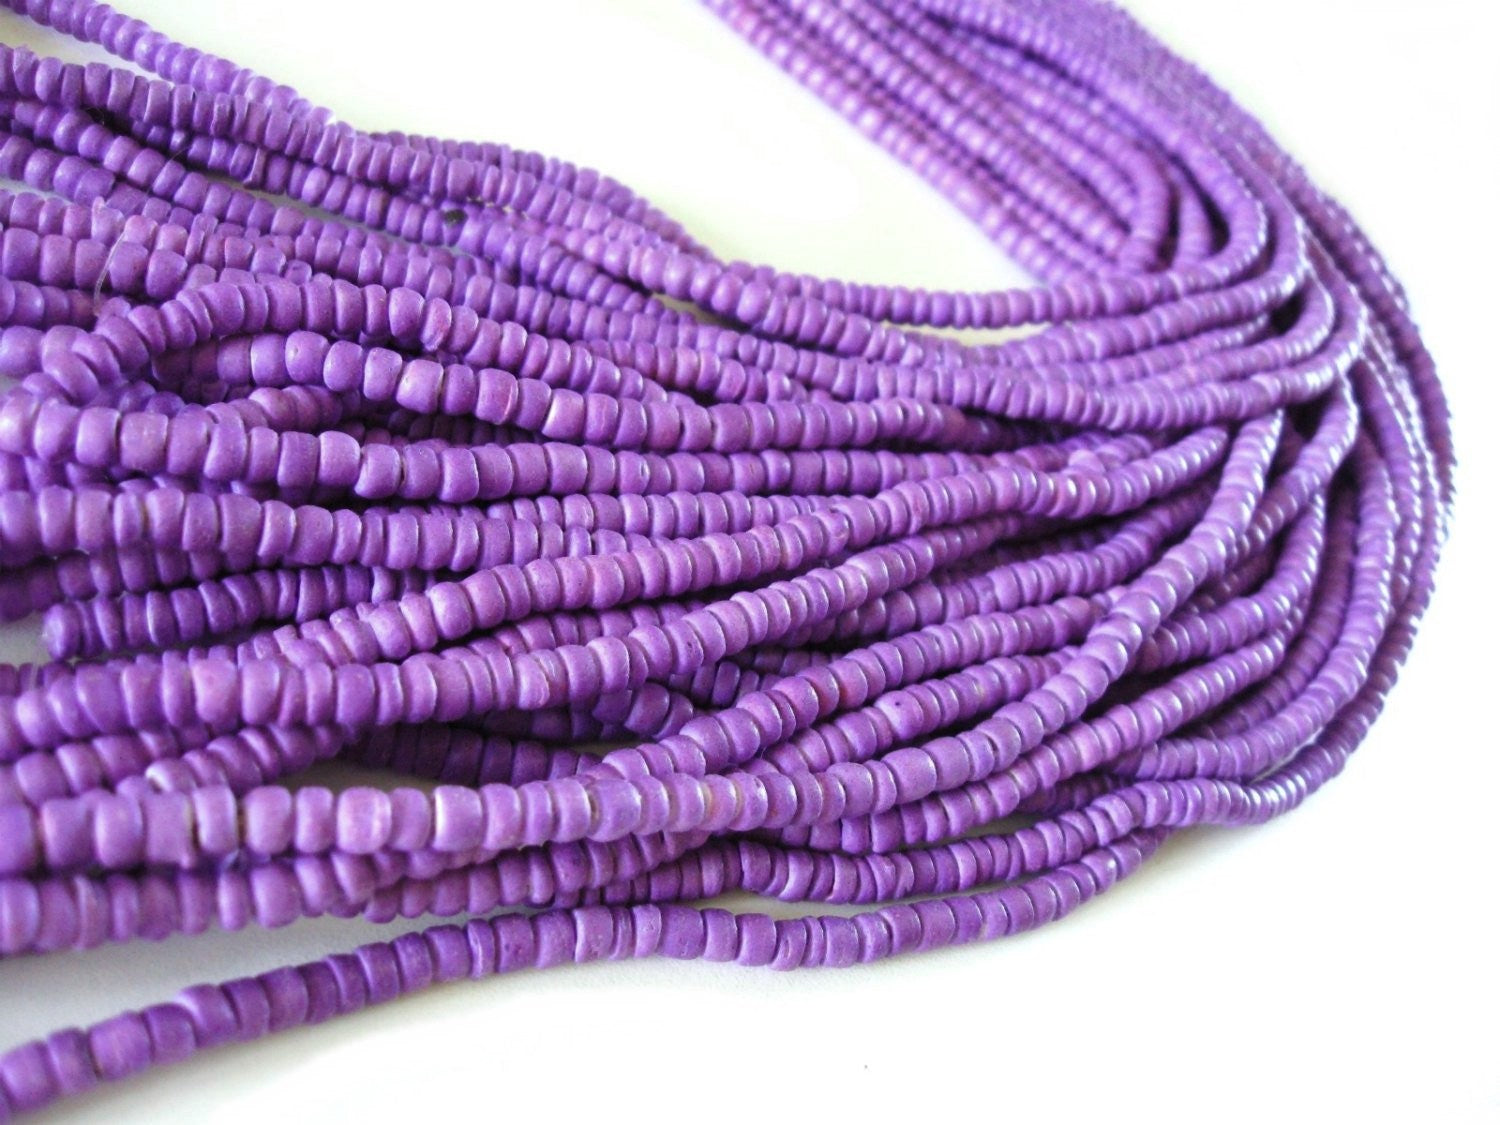 Coconut bead 150 lilac wood Beads - Coconut Rondelle Disk Beads 4-5mm